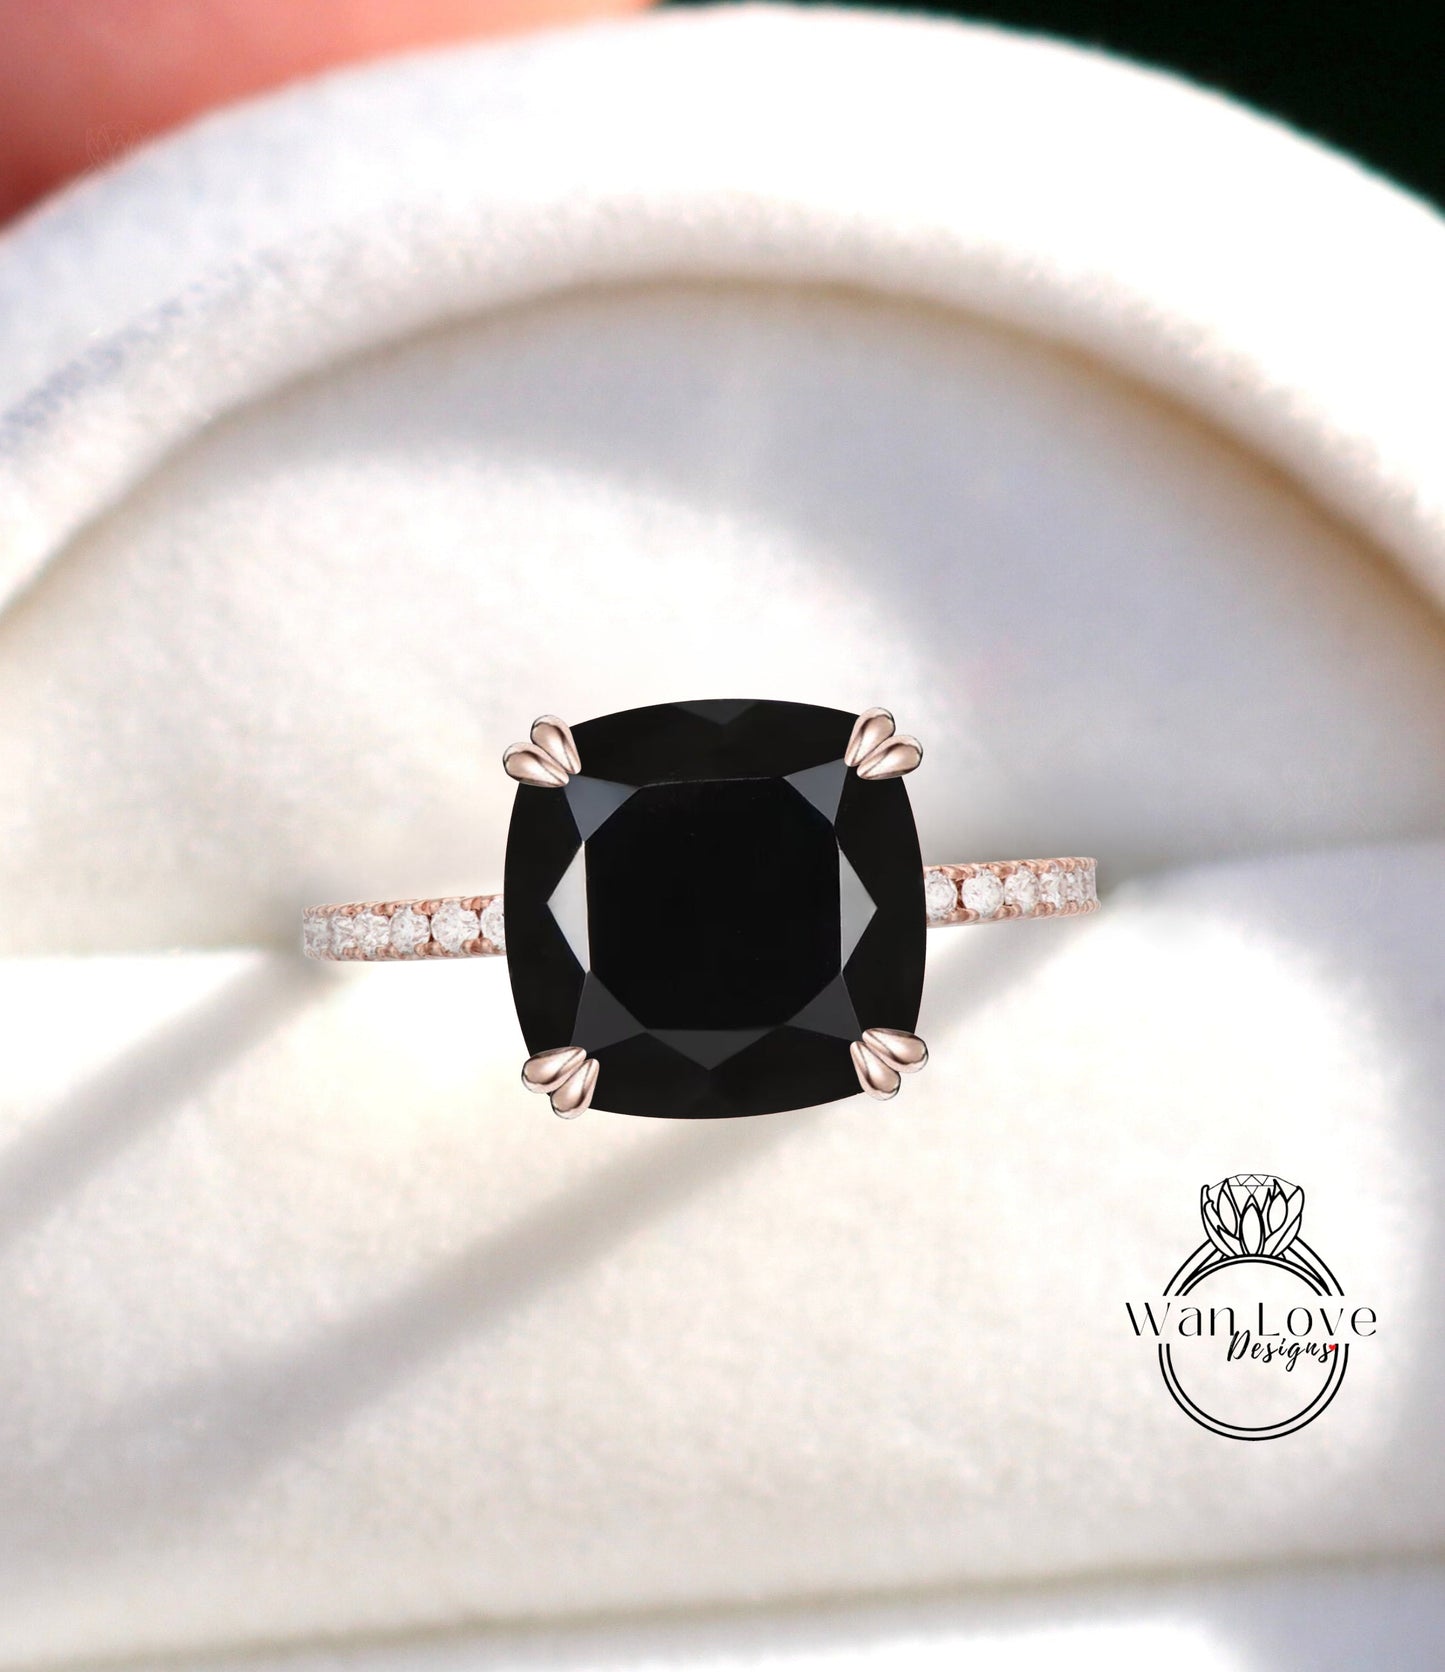 Black Spinel & Diamond Cushion cut Engagement ring Vintage Rose Gold ring Unique Bridal Art deco cushion Solitaire Anniversary Promise ring Wan Love Designs